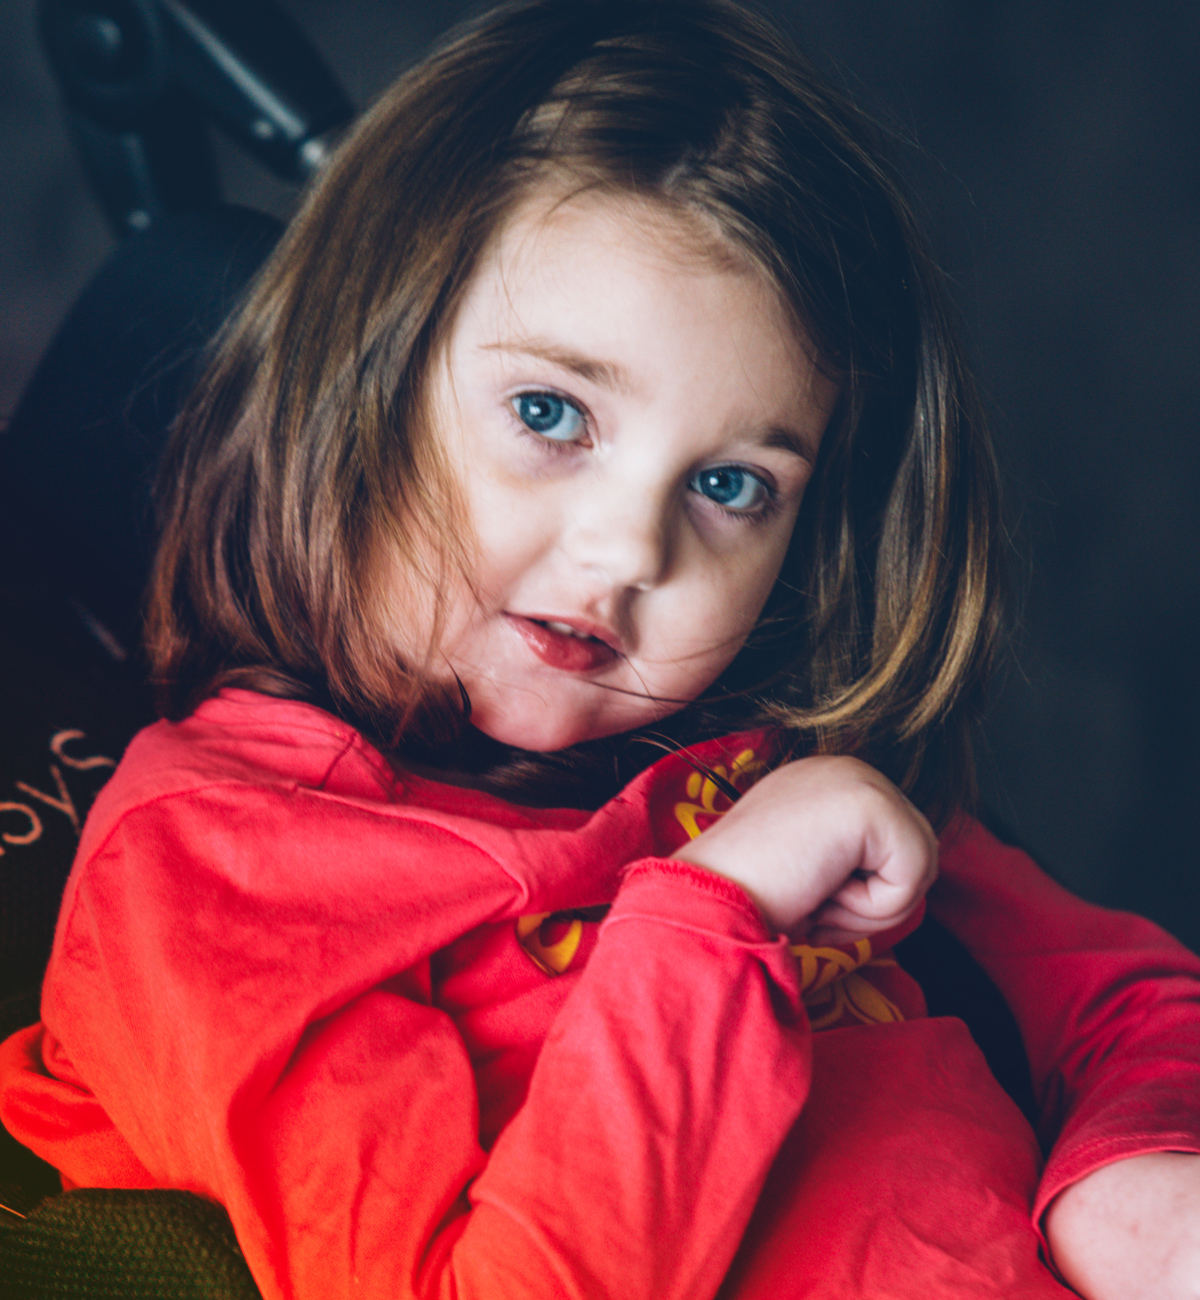 The Rett Syndrome Research Trust Announces Roadmap to Cure Devastating Neurological Disorder that Afflicts 350,000 Girls and Women